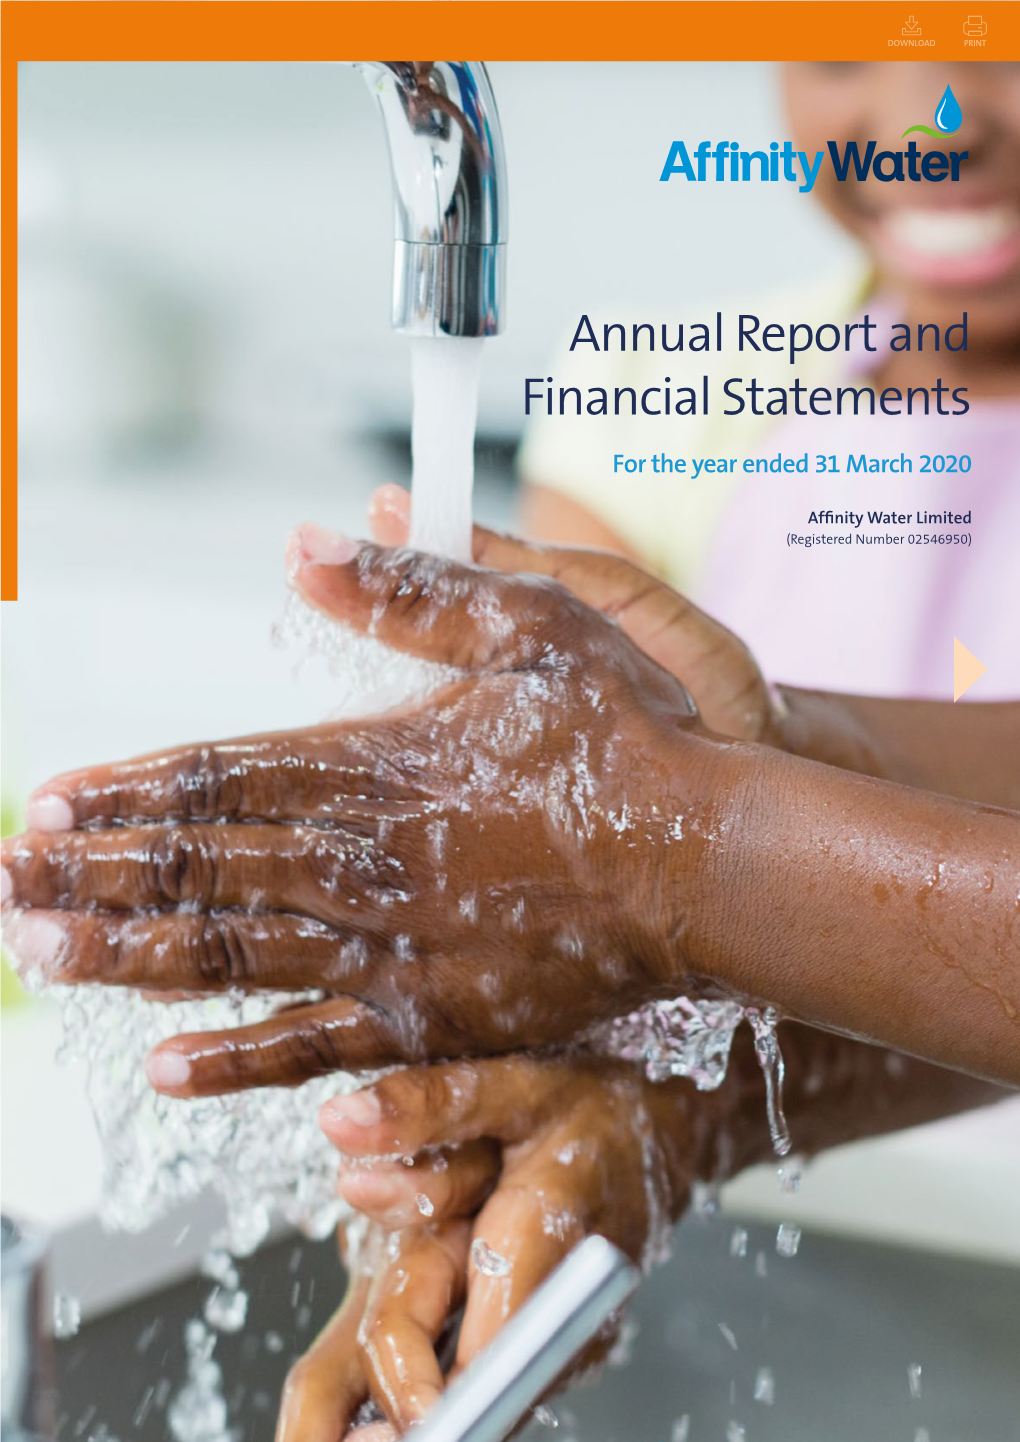 Annual Report and Financial Statements for the Year Ended 31 March 2020